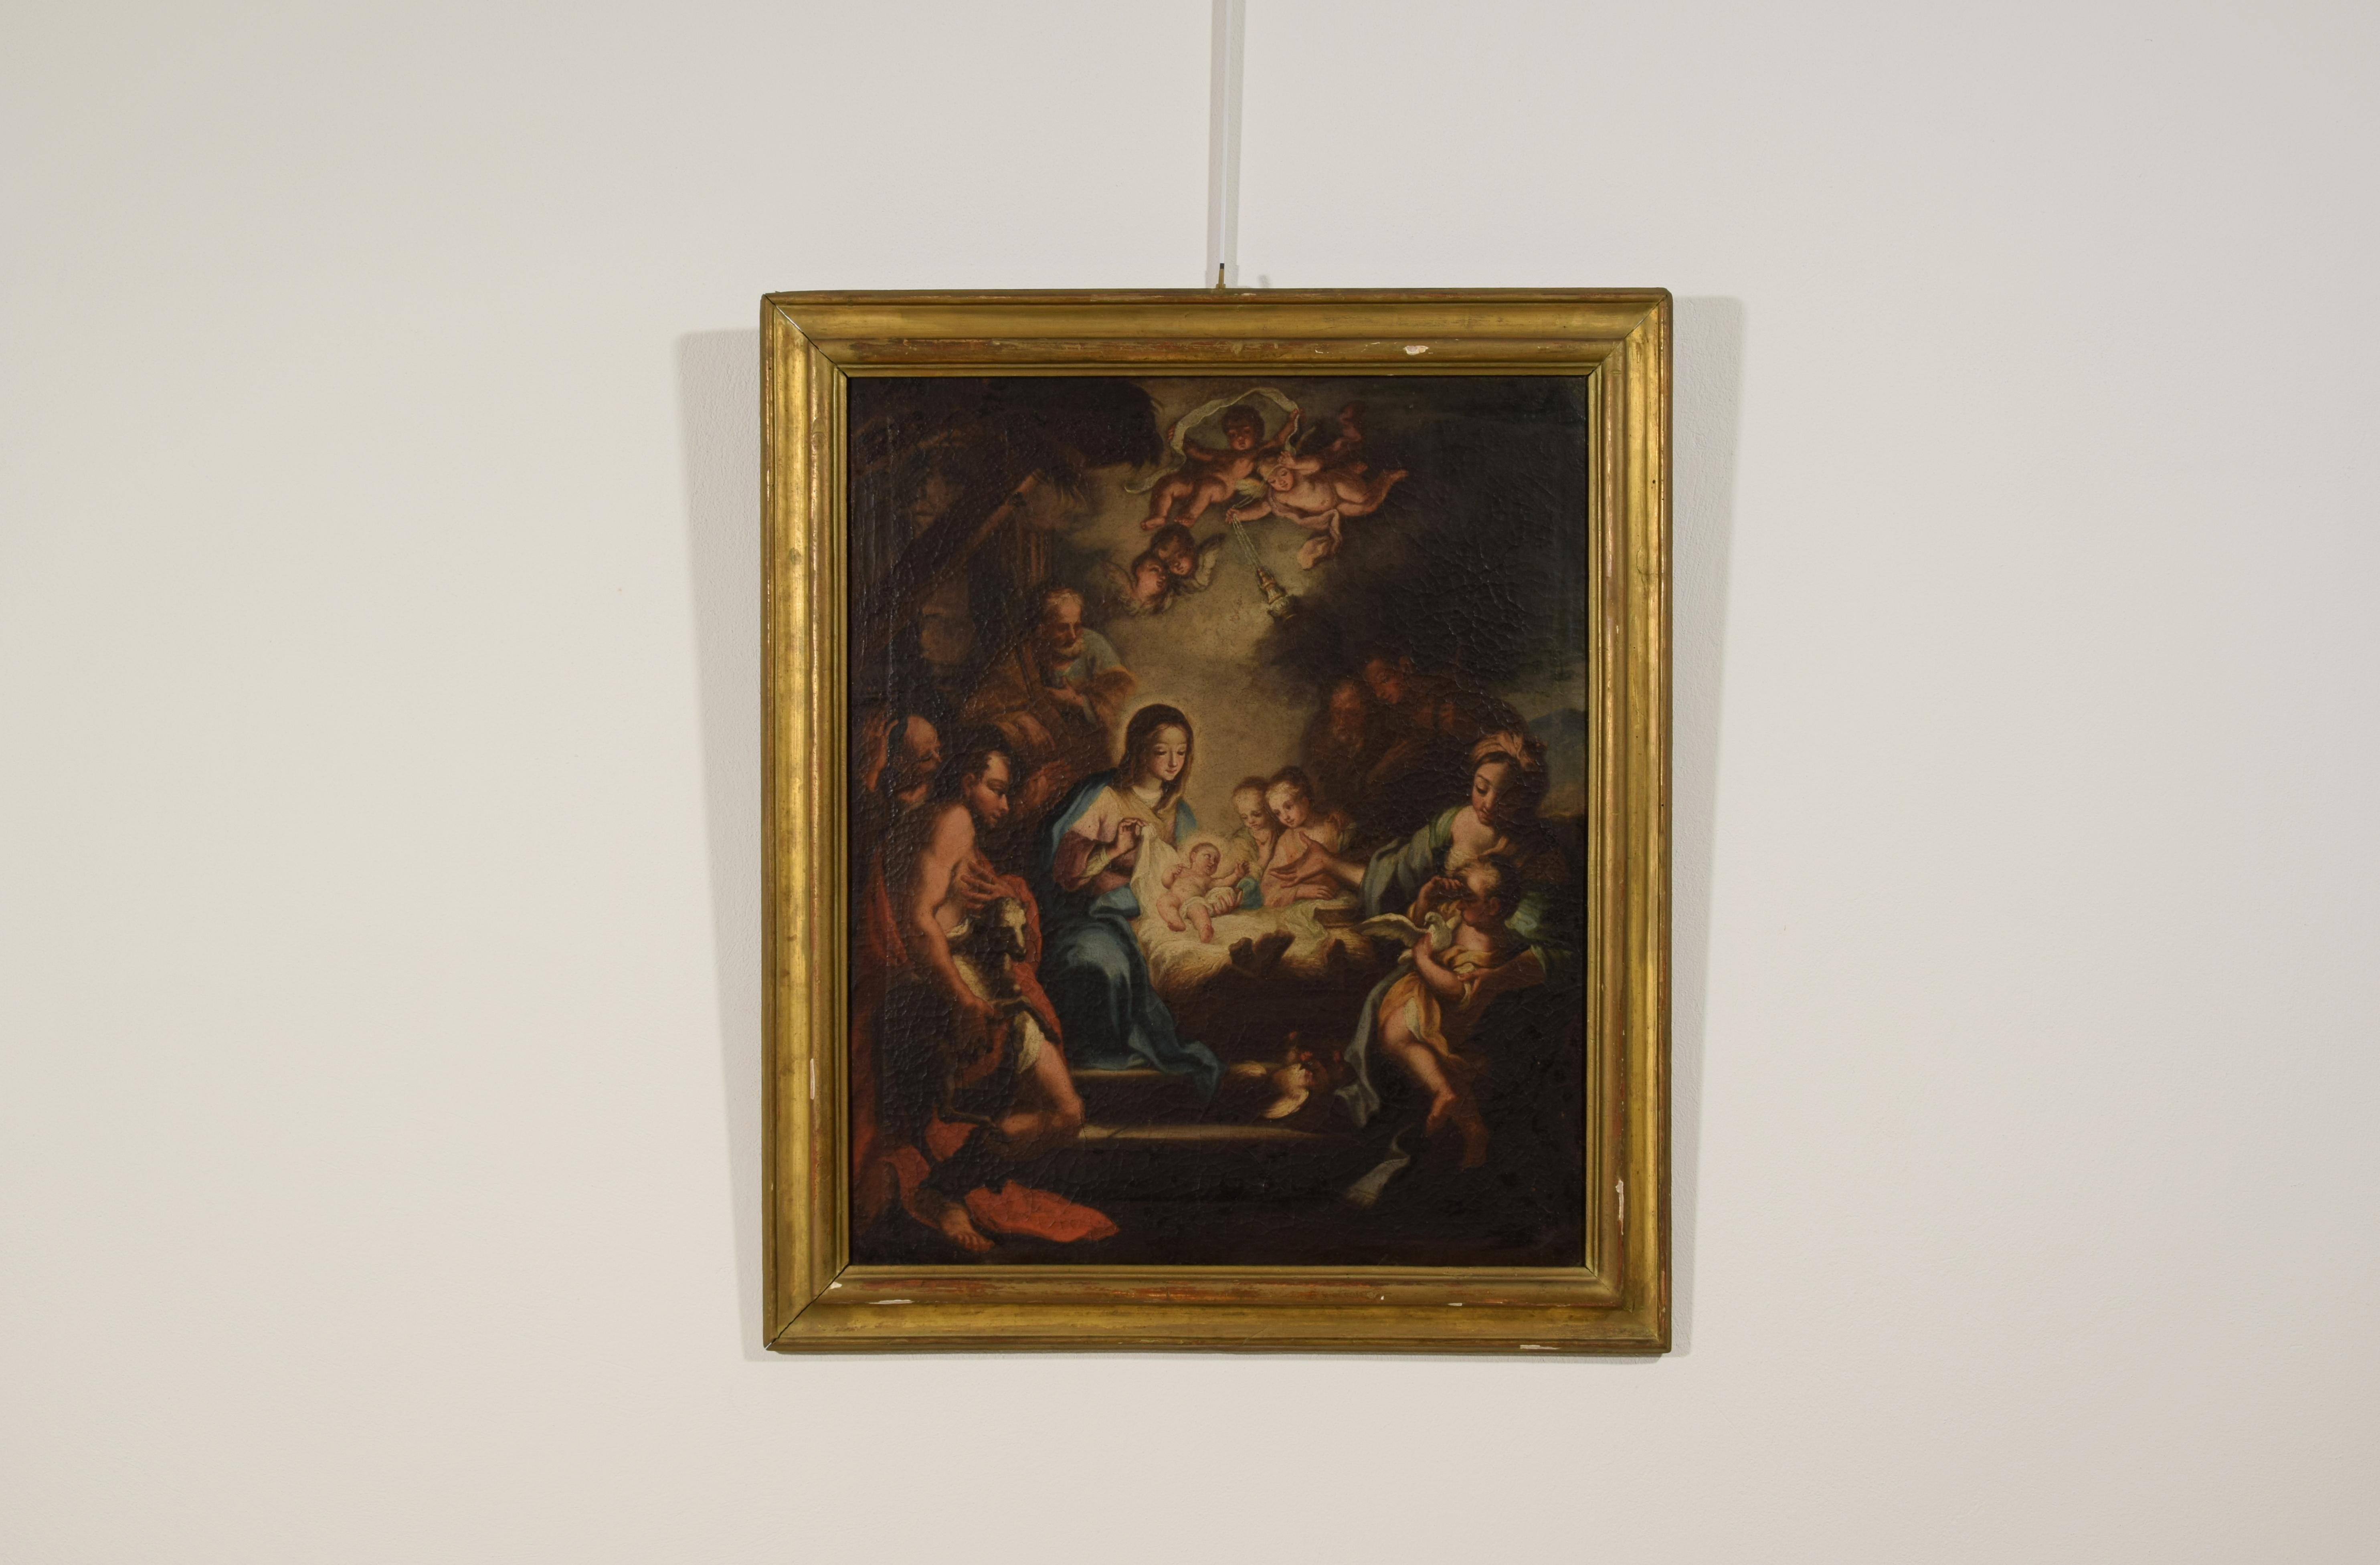 18th Century, Italian Painting, Adoration of the Shepherds by Follower of Conca 1